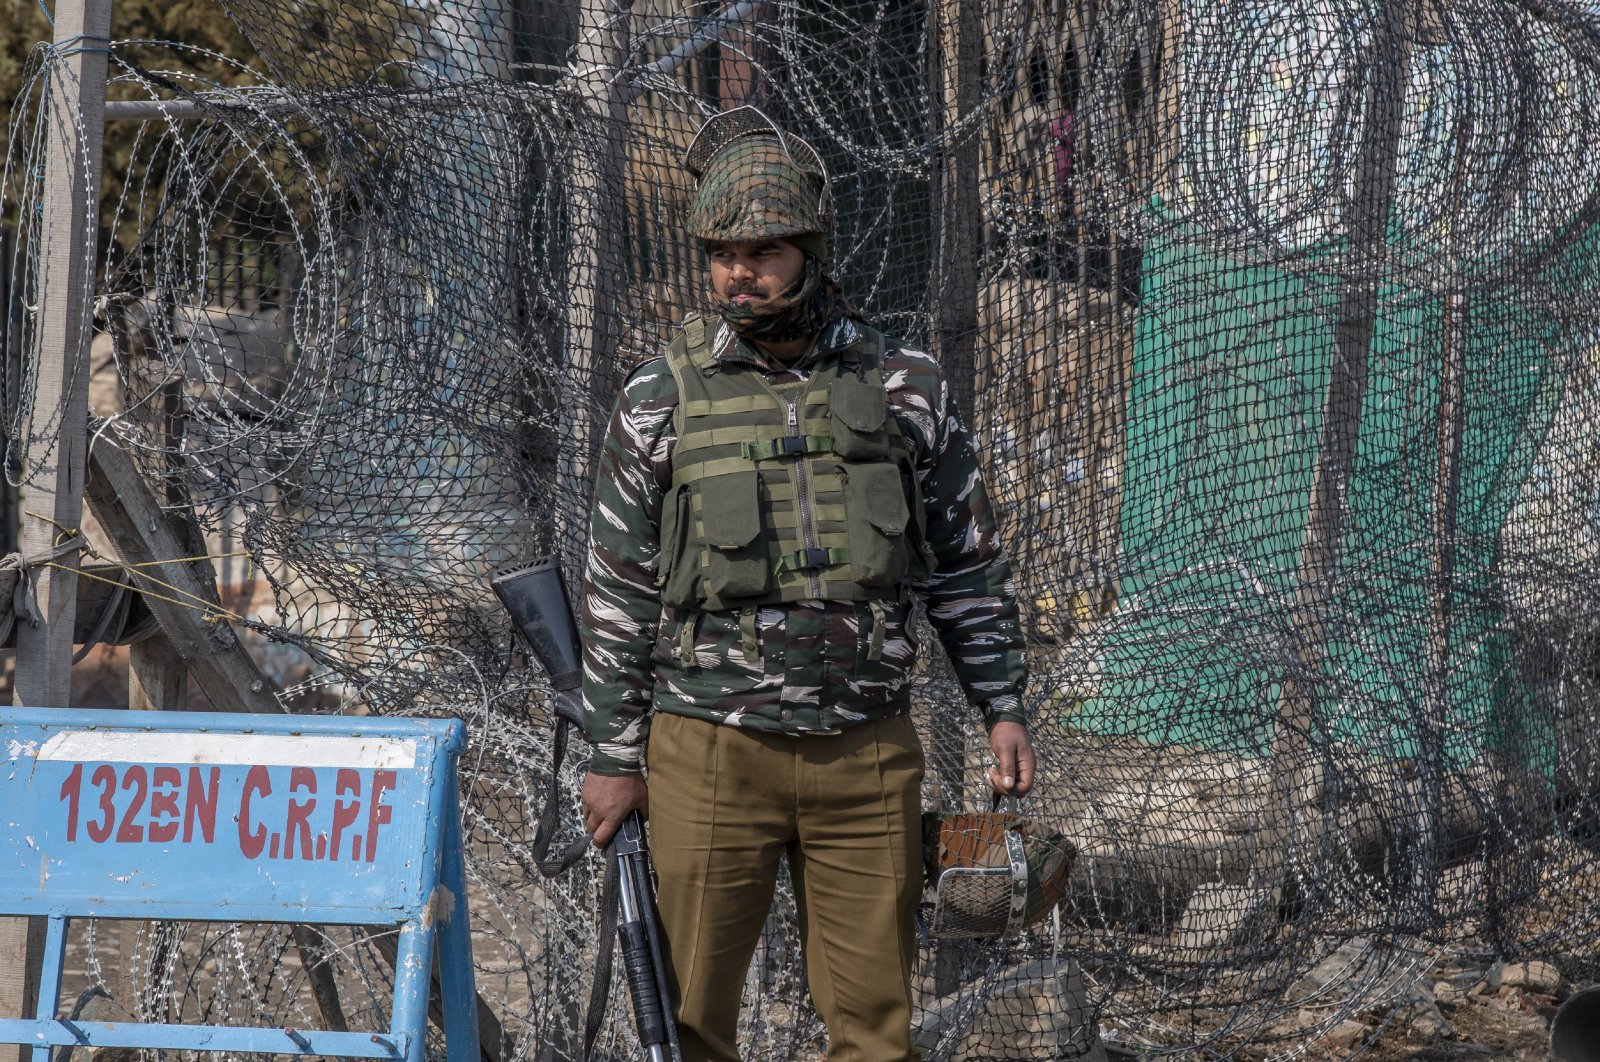 An Indian paramilitary soldier stands guard outside a paramilitary post during a strike to mark the anniversary of Kashmiri leader Maqbool Bhat's death in Srinagar, Indian controlled Kashmir, Feb. 11, 2021. (AP Photo)